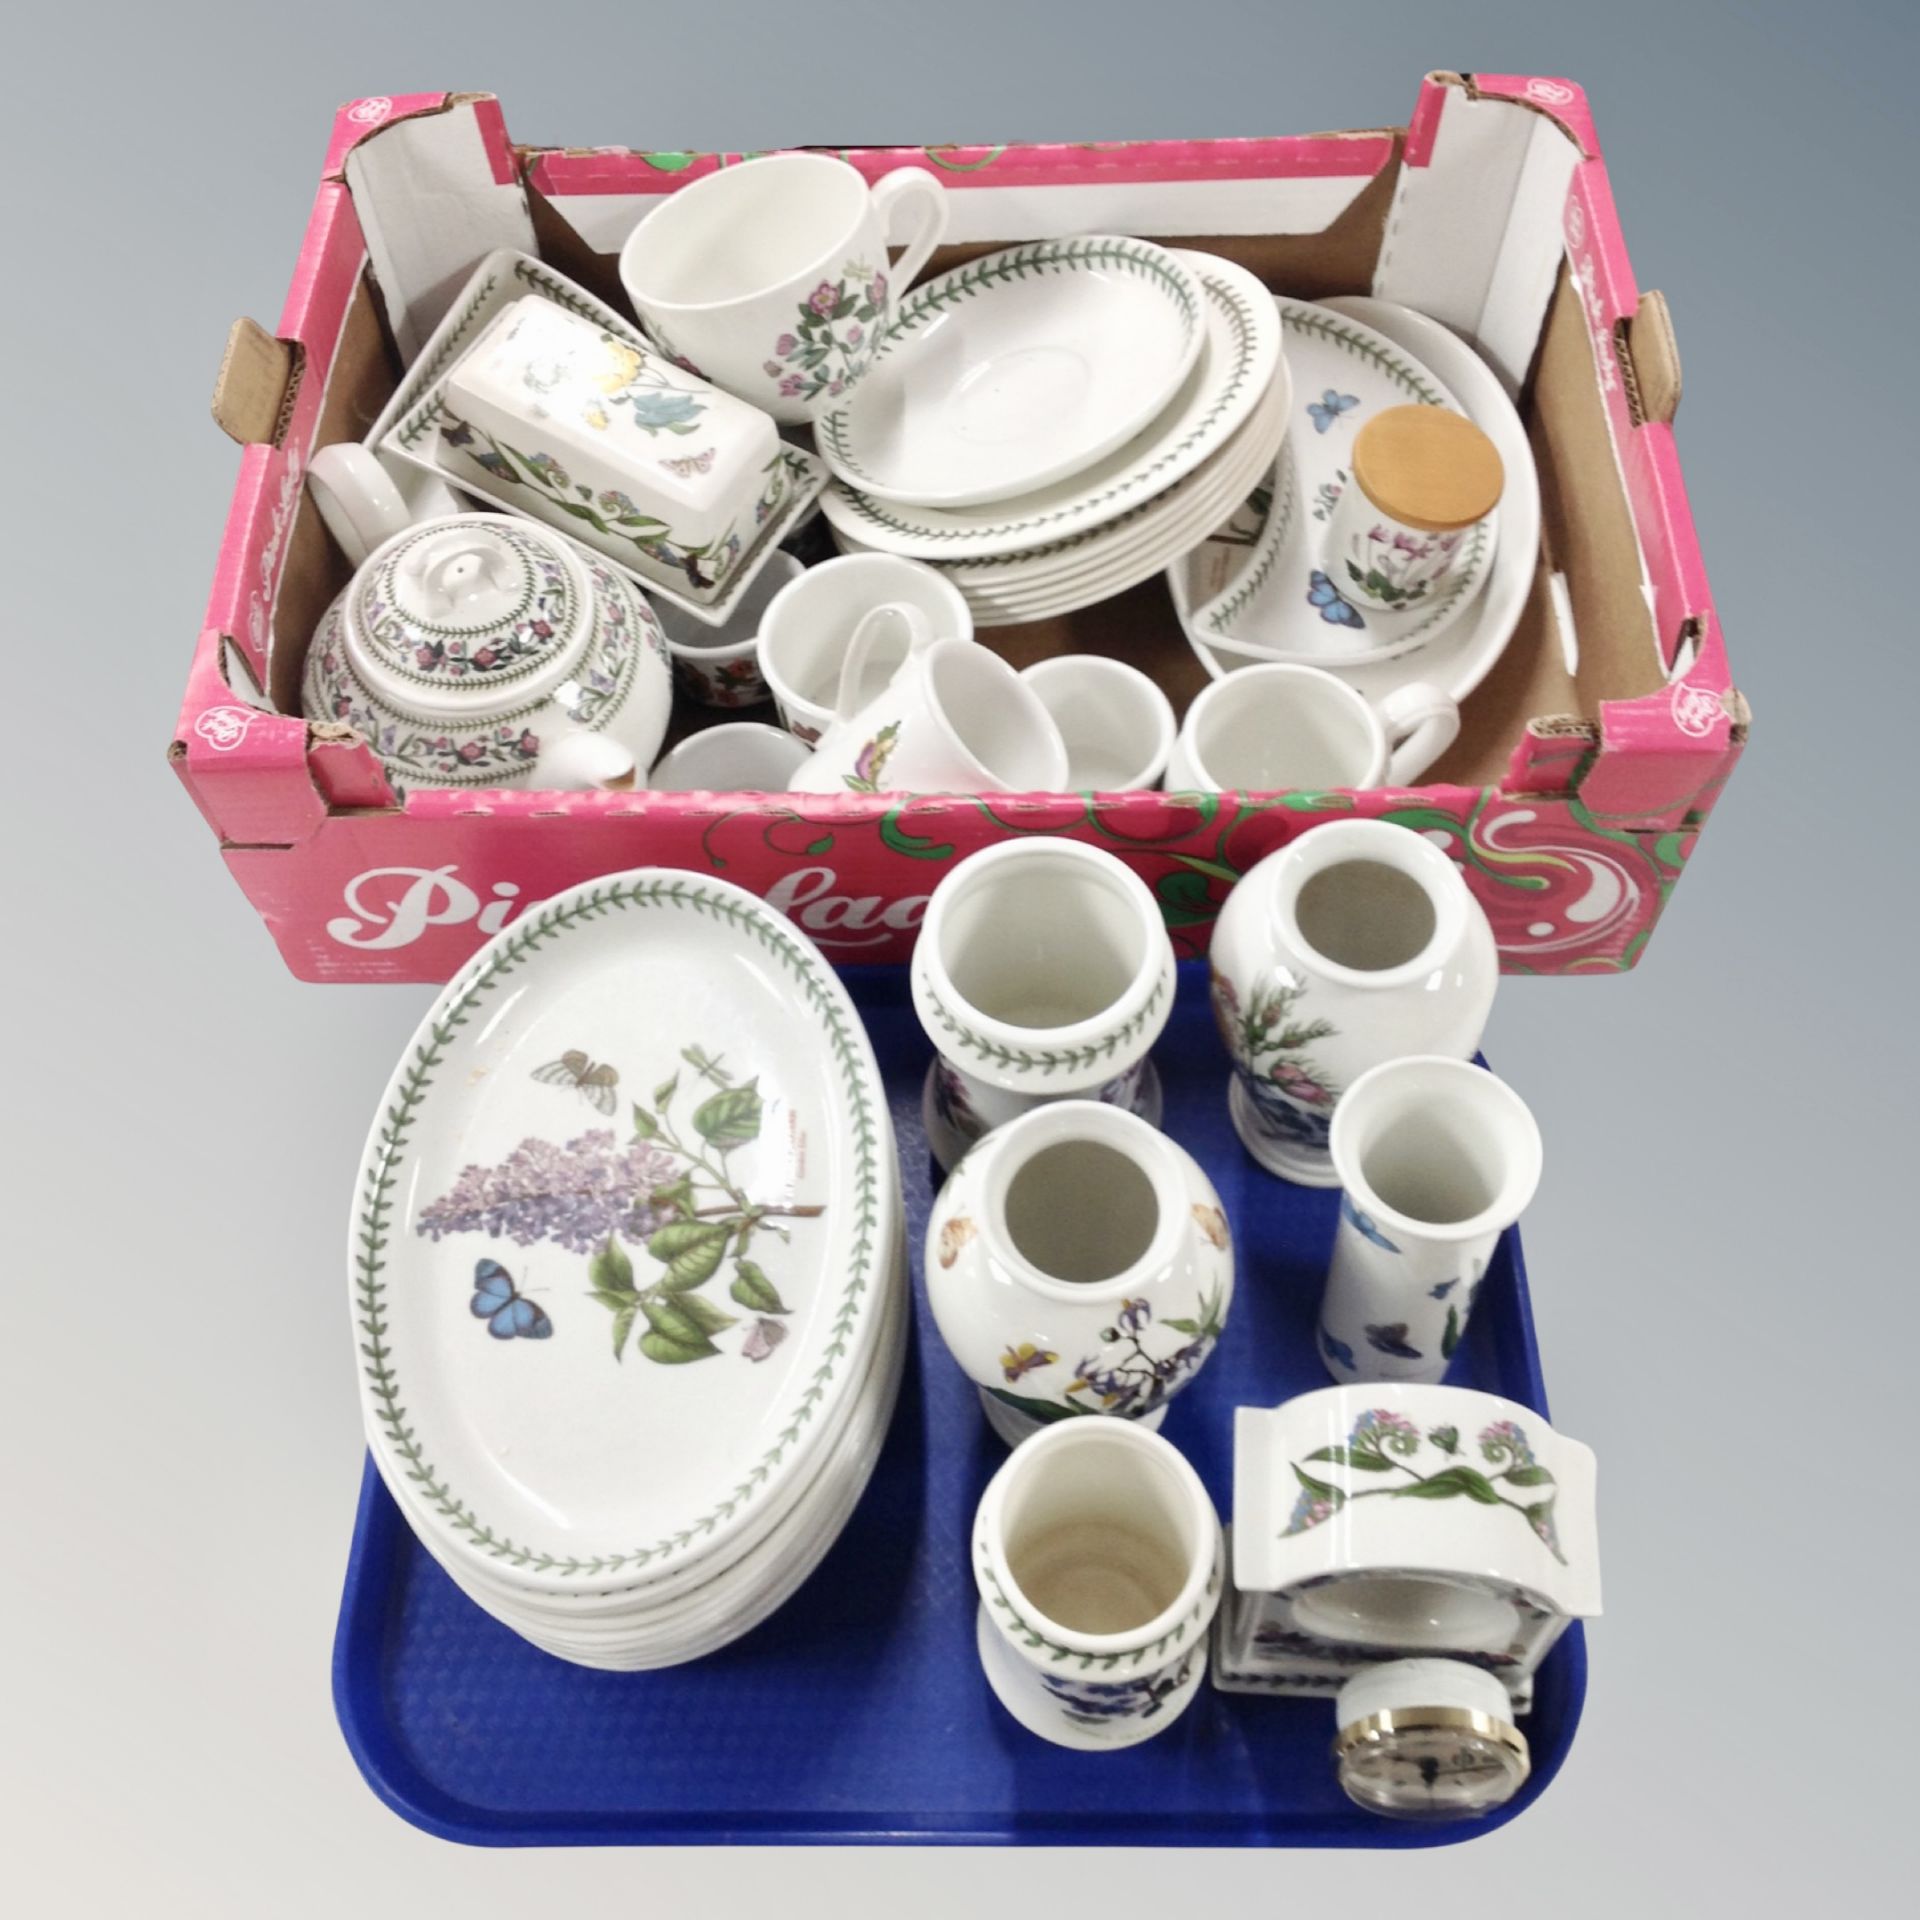 A box and tray containing floral pattern tea,